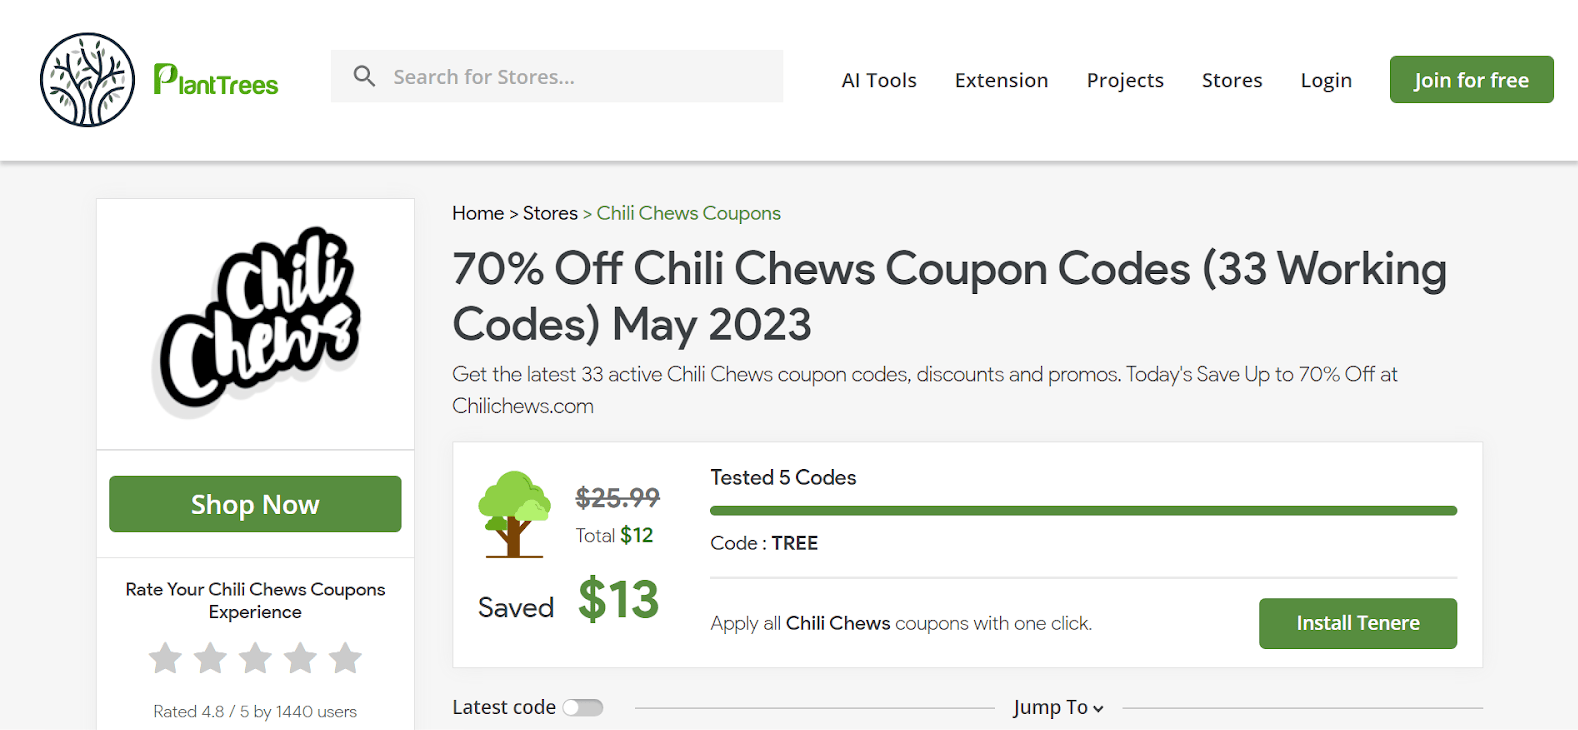 How To Use Chili Chews Coupon Codes 2